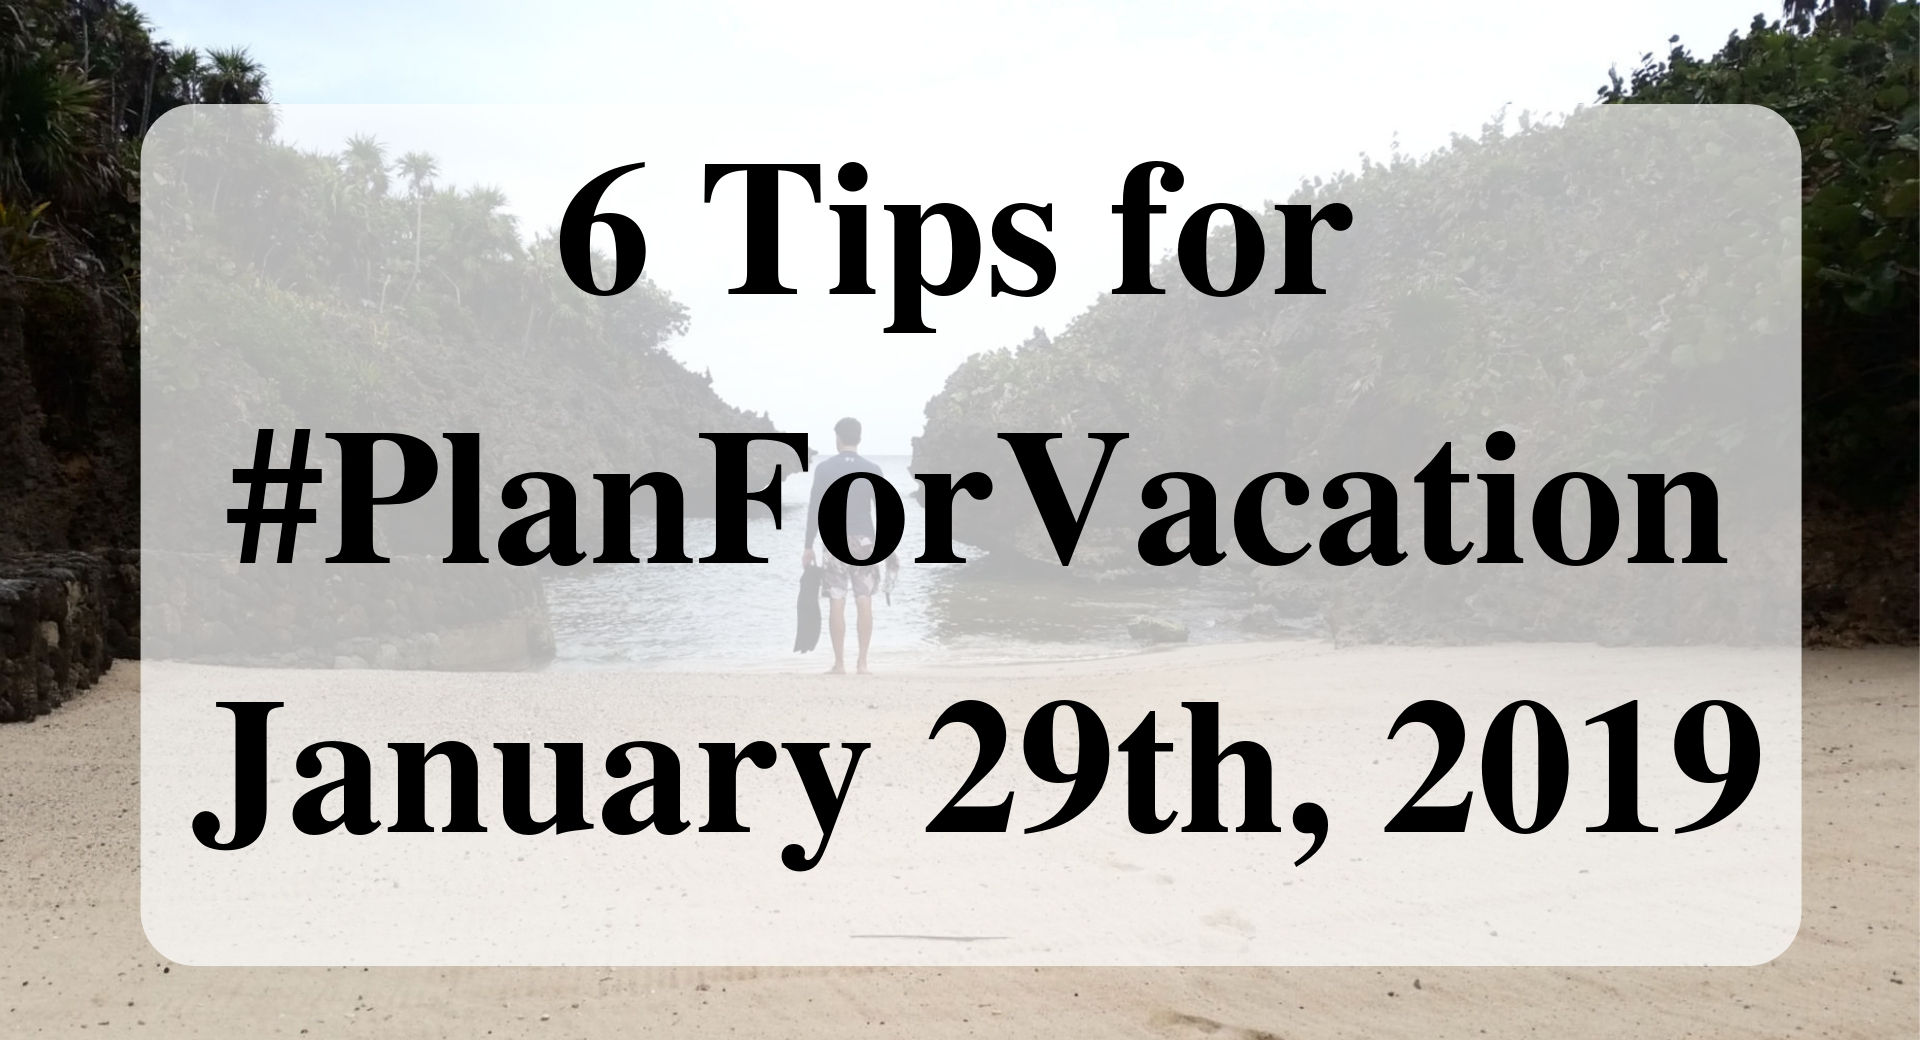 6 Tips for #PlanForVacation January 29th, 2019